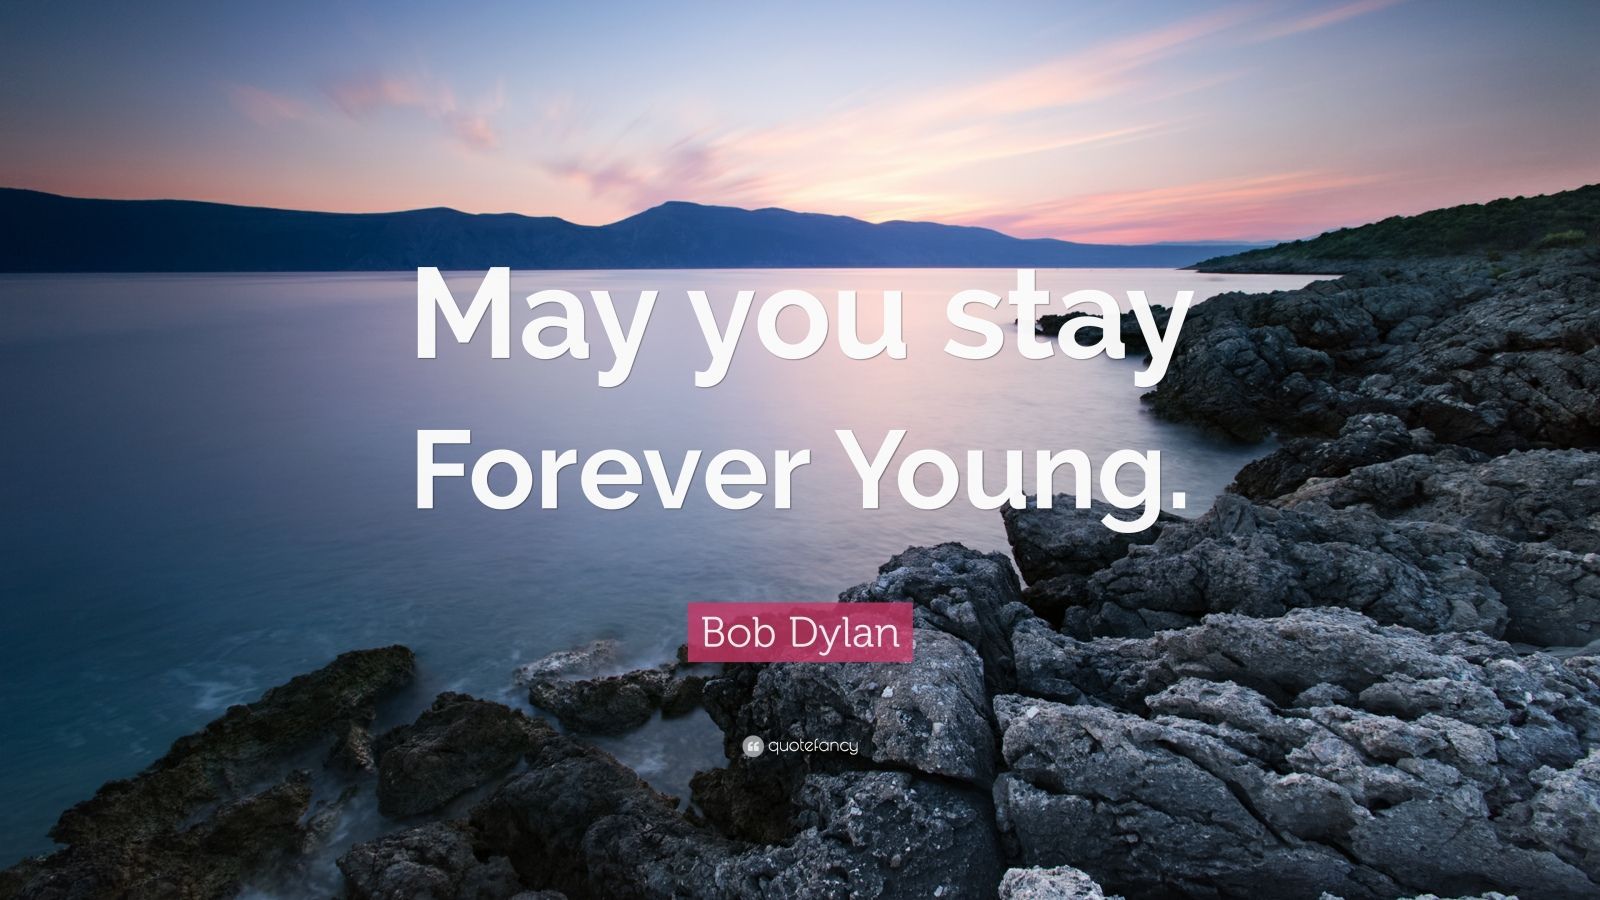 Bob Dylan Quote: “May you stay Forever Young.” (12 wallpaper)